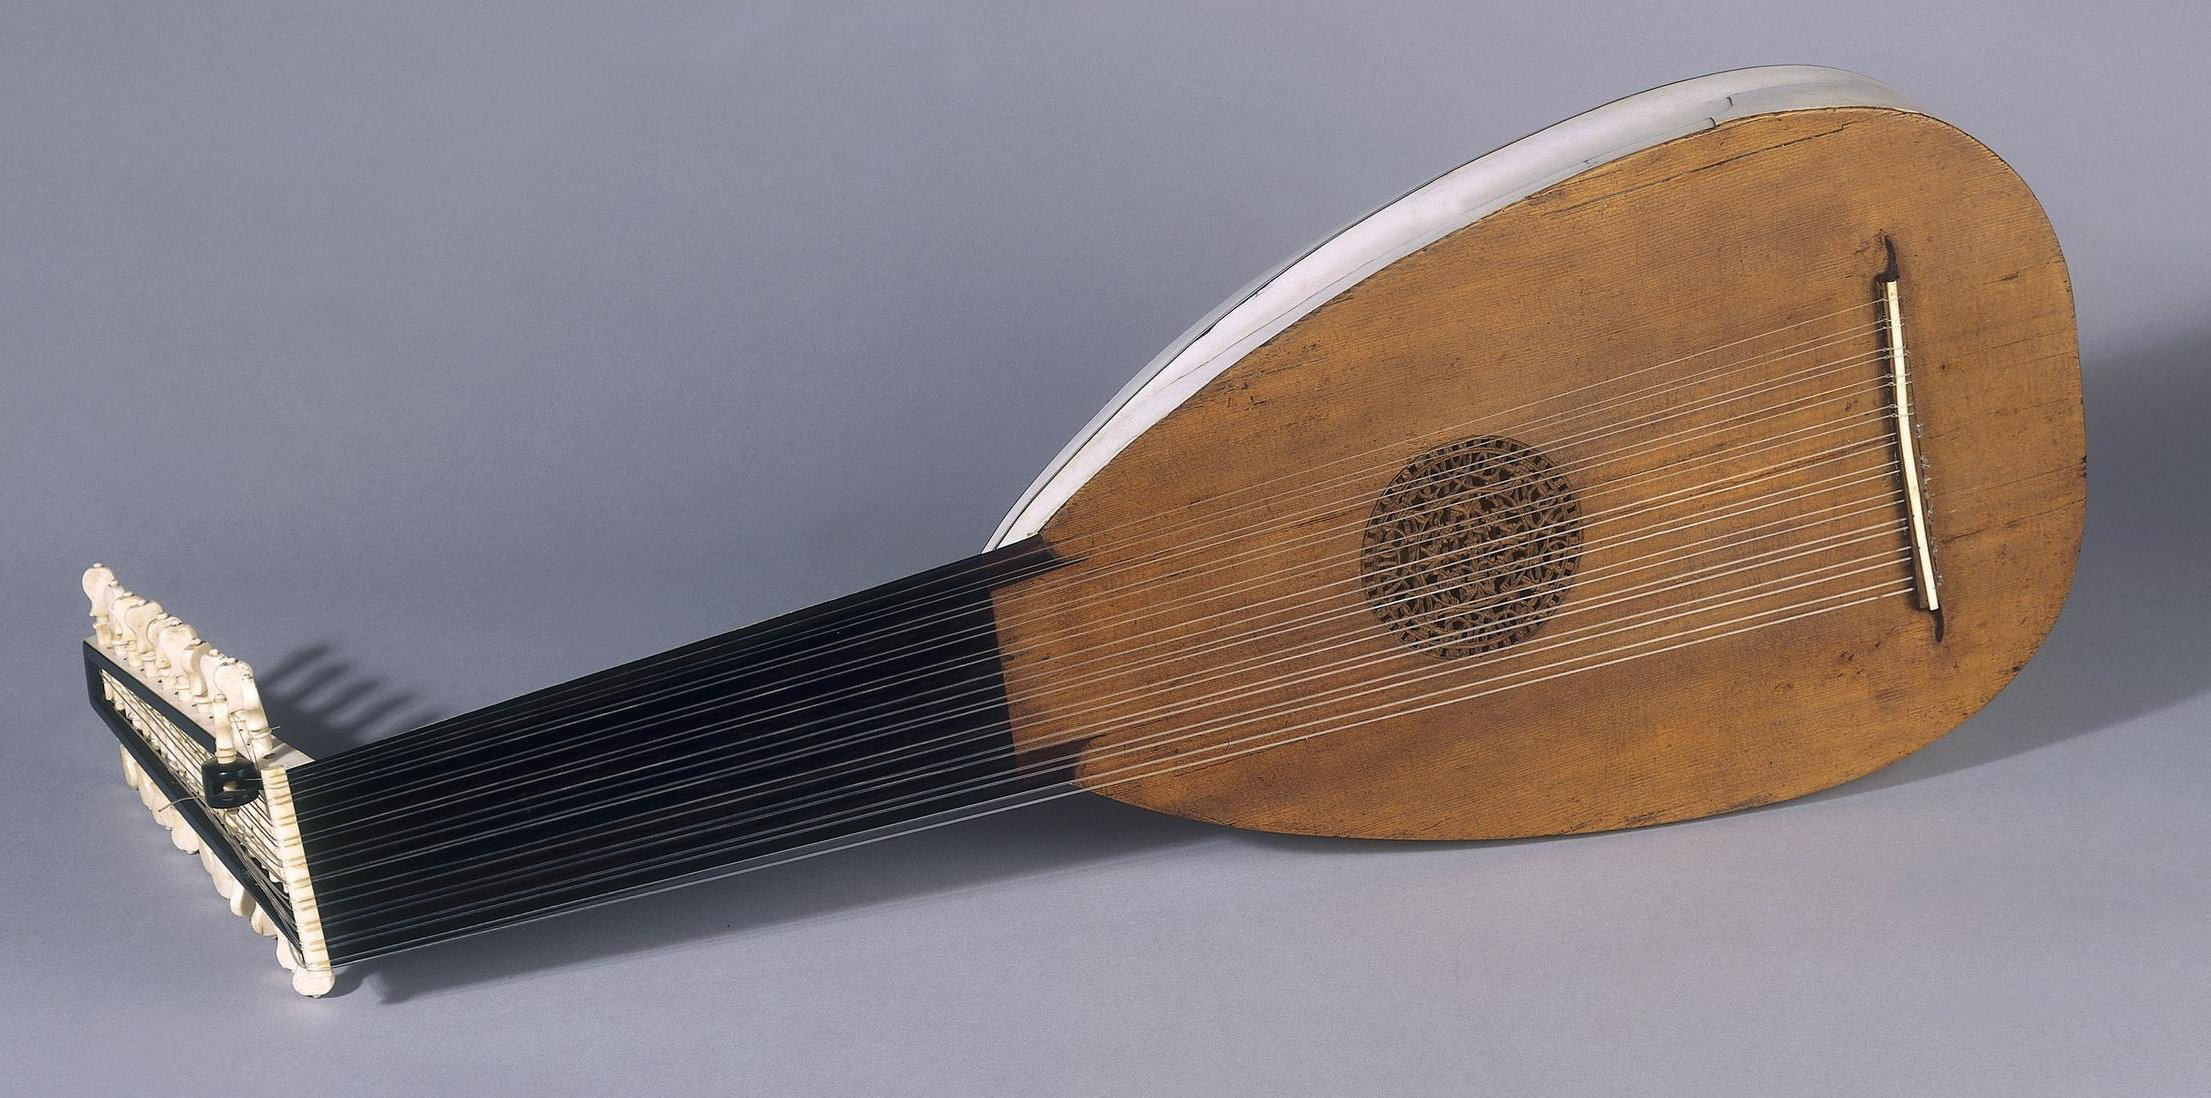 With sound of lute and pleasing words The Lute Song and Voice Types in Late Sixteenth- and Early Seventeenth-Century England Royal Musical Association Research Chronicle Cambridge Core